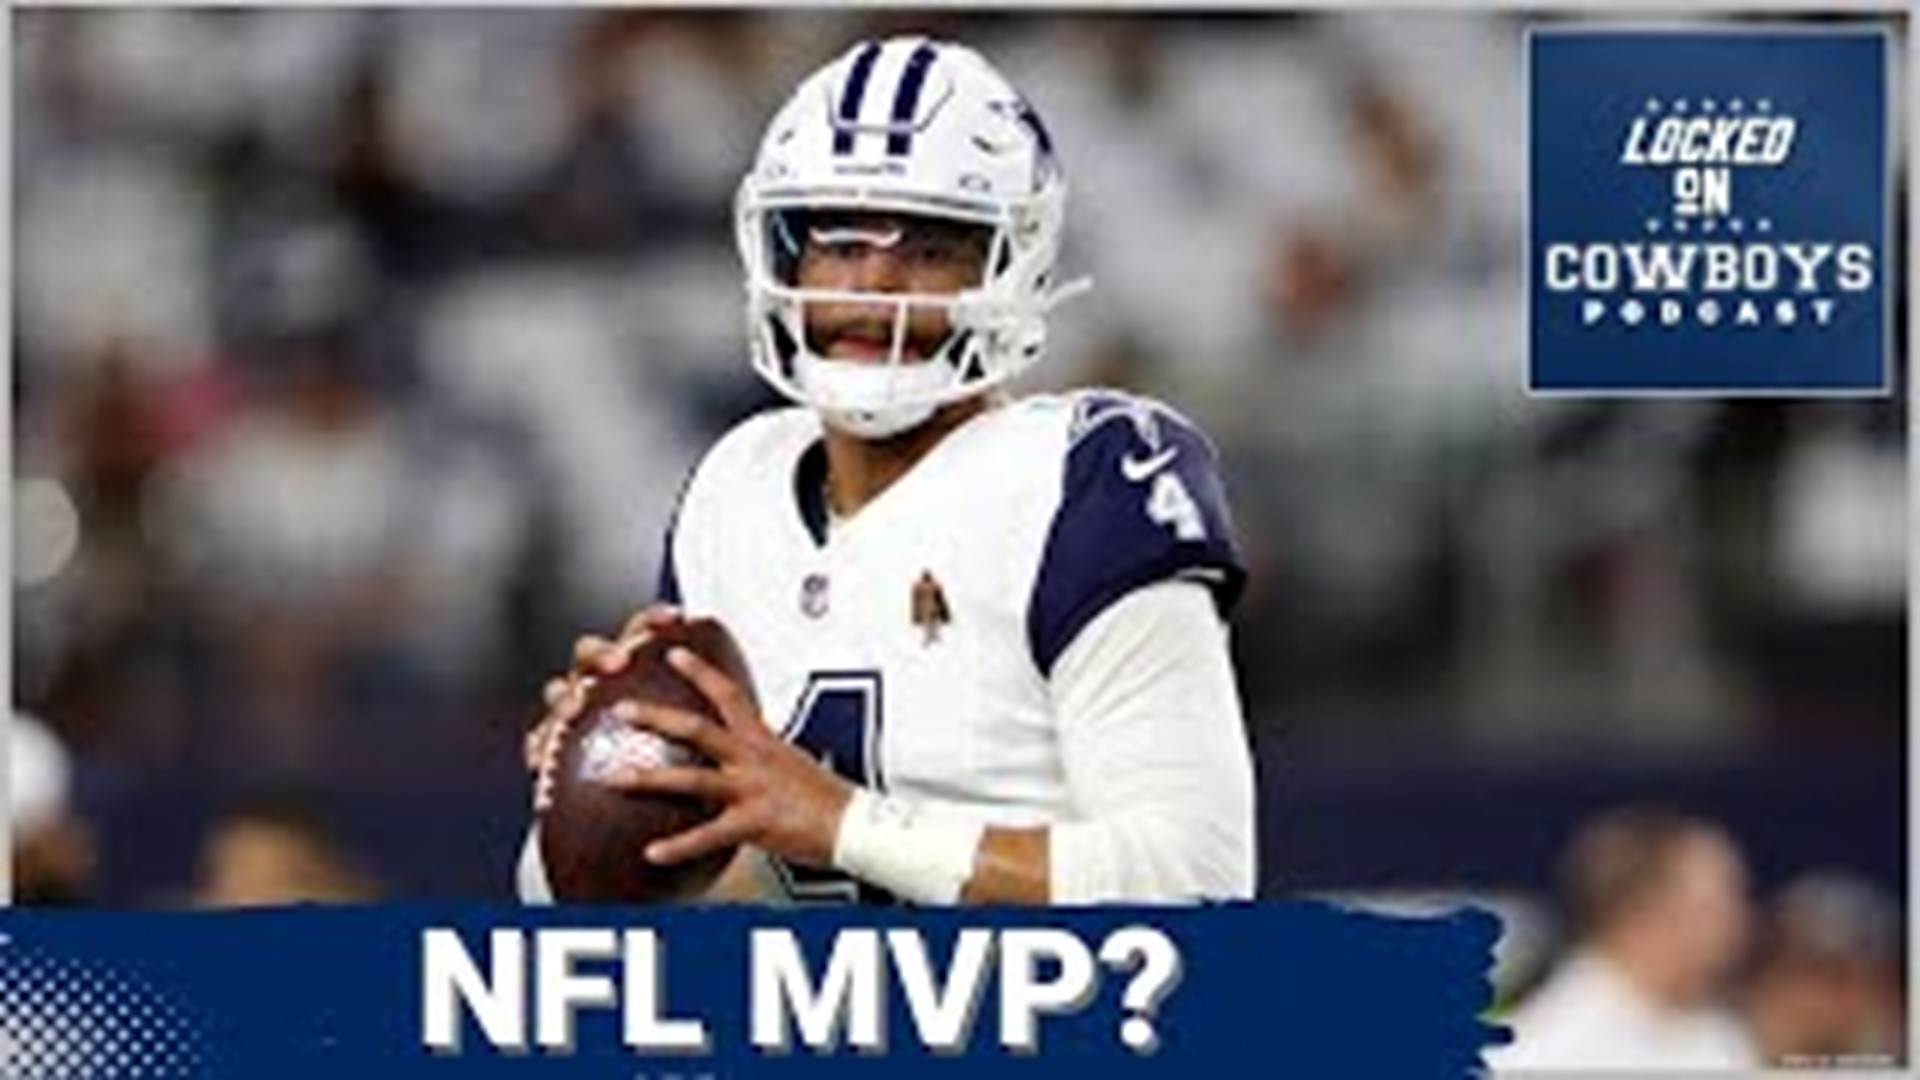 Dallas Cowboys QB Dak Prescott had another big performance against the Eagles in Week 14. Is that enough to make him the favorite to win the NFL MVP award?